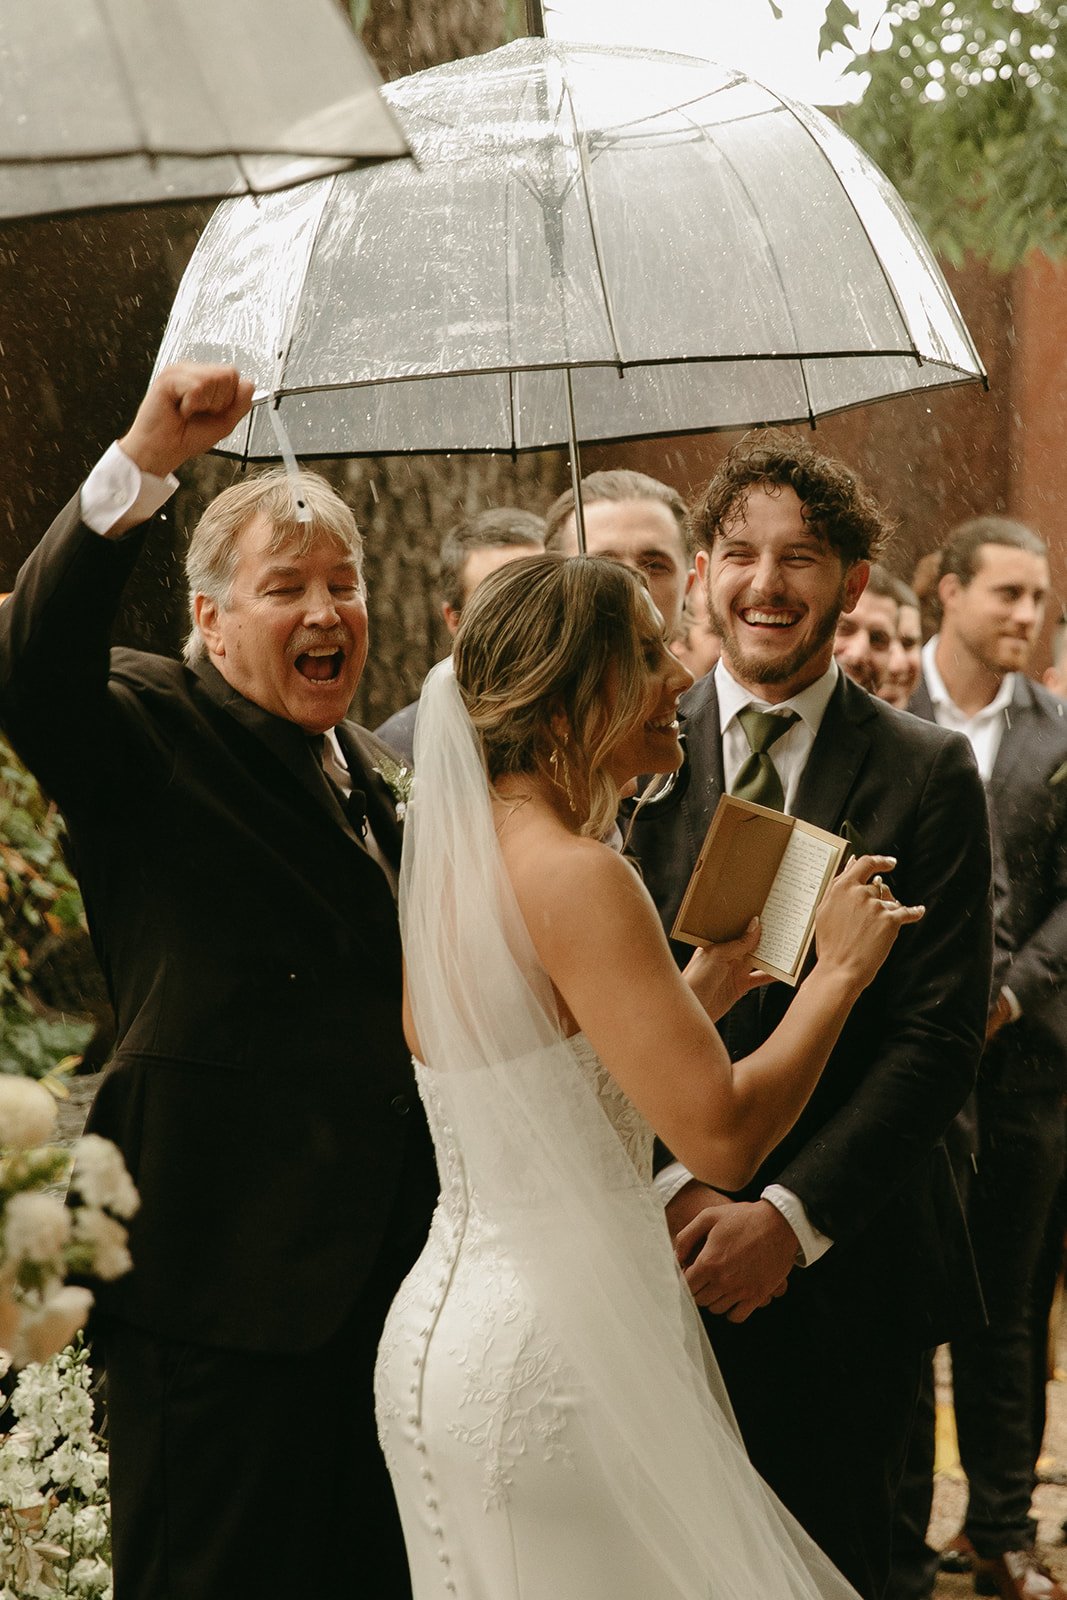 Bride and groom smiling during wedding ceremony in the rain